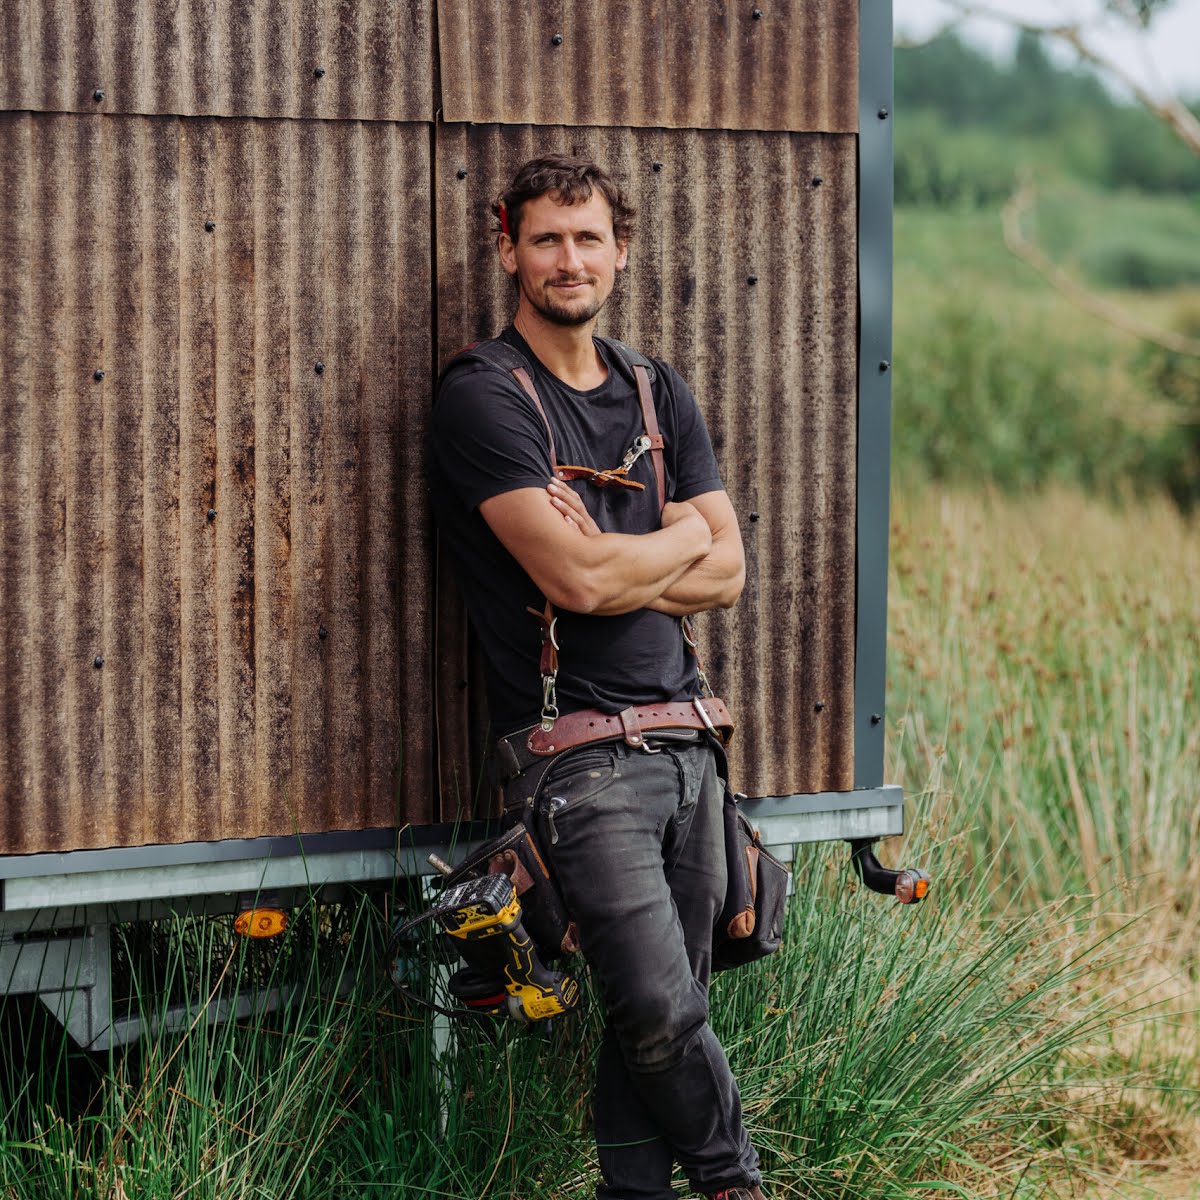 Harrison leaning on a Tigín clad in eco-friendly, hemp-fibre corrugated panels sourced from Margent Farm in the UK.